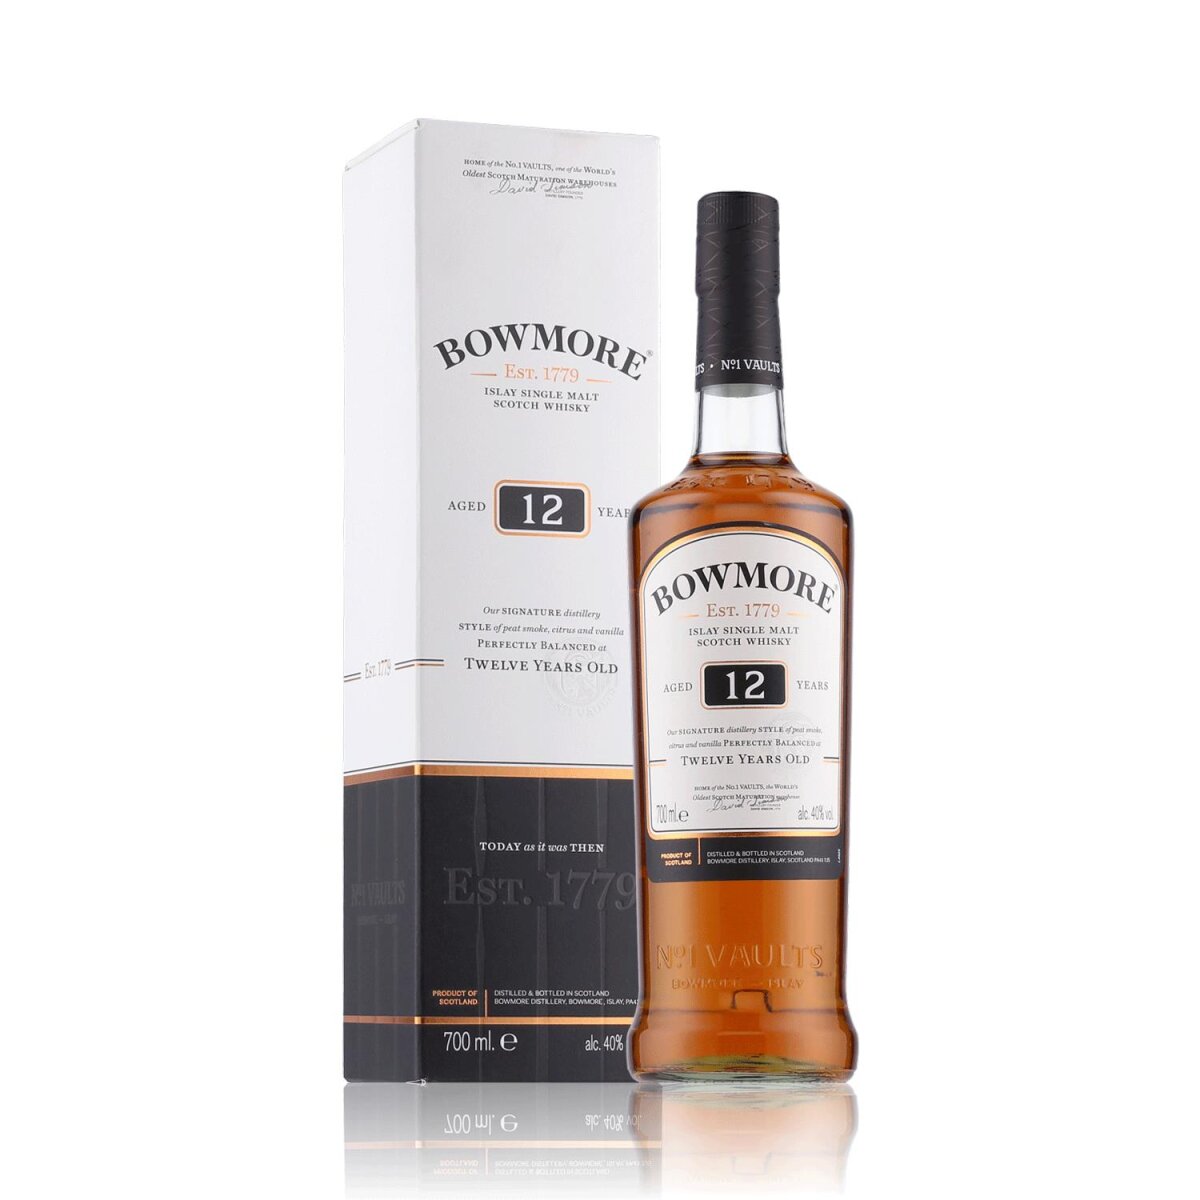 Years Vol. Bowmore 40% 12 in Geschenkbox Whisky 0,7l